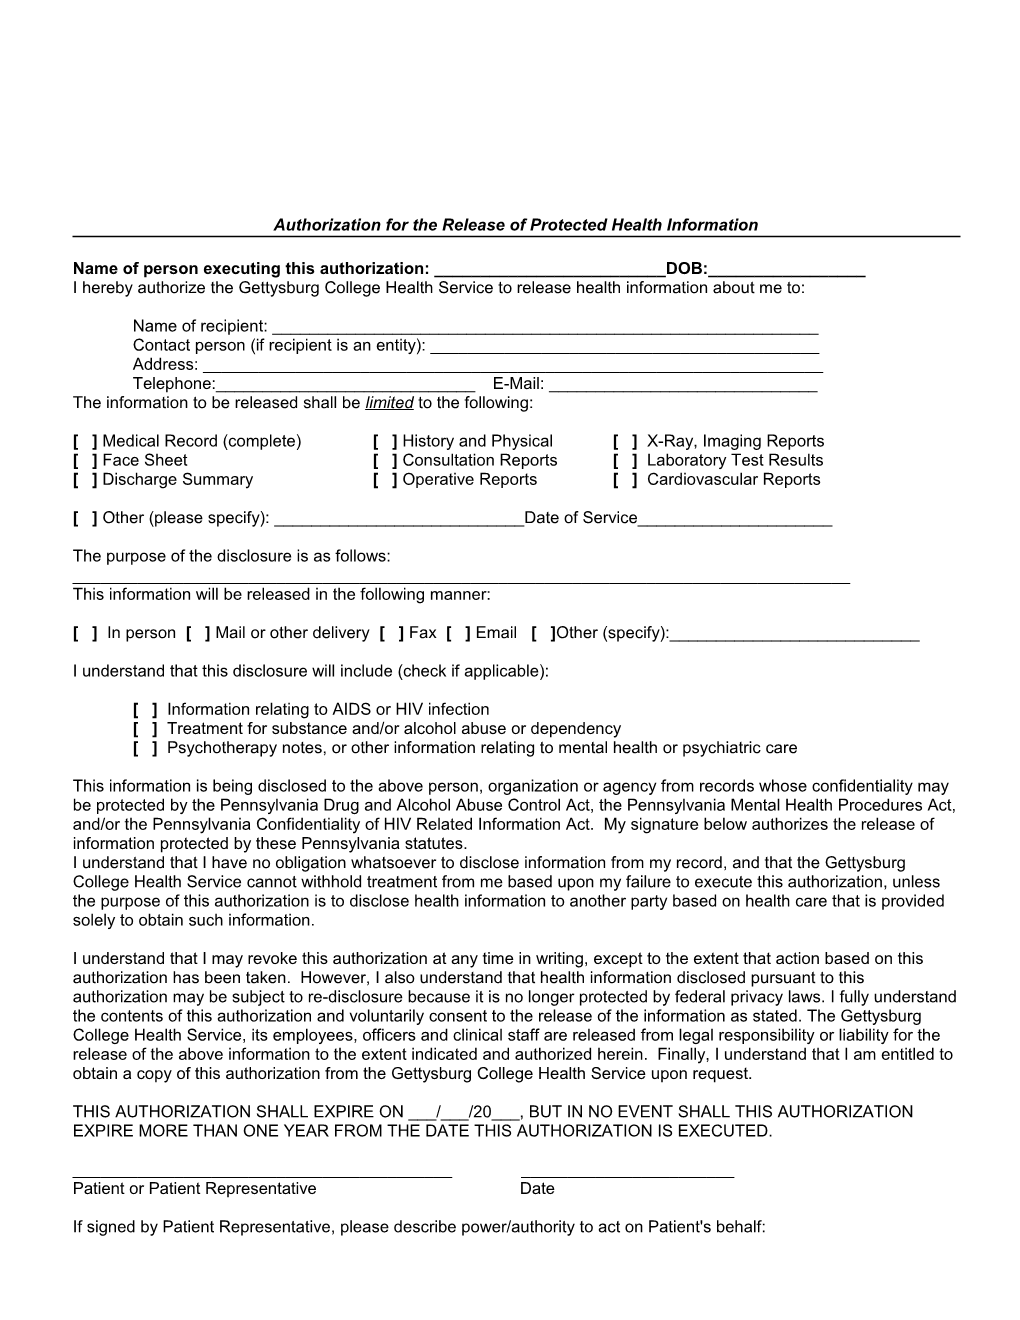 HC General Authorization Form (A485667;1)